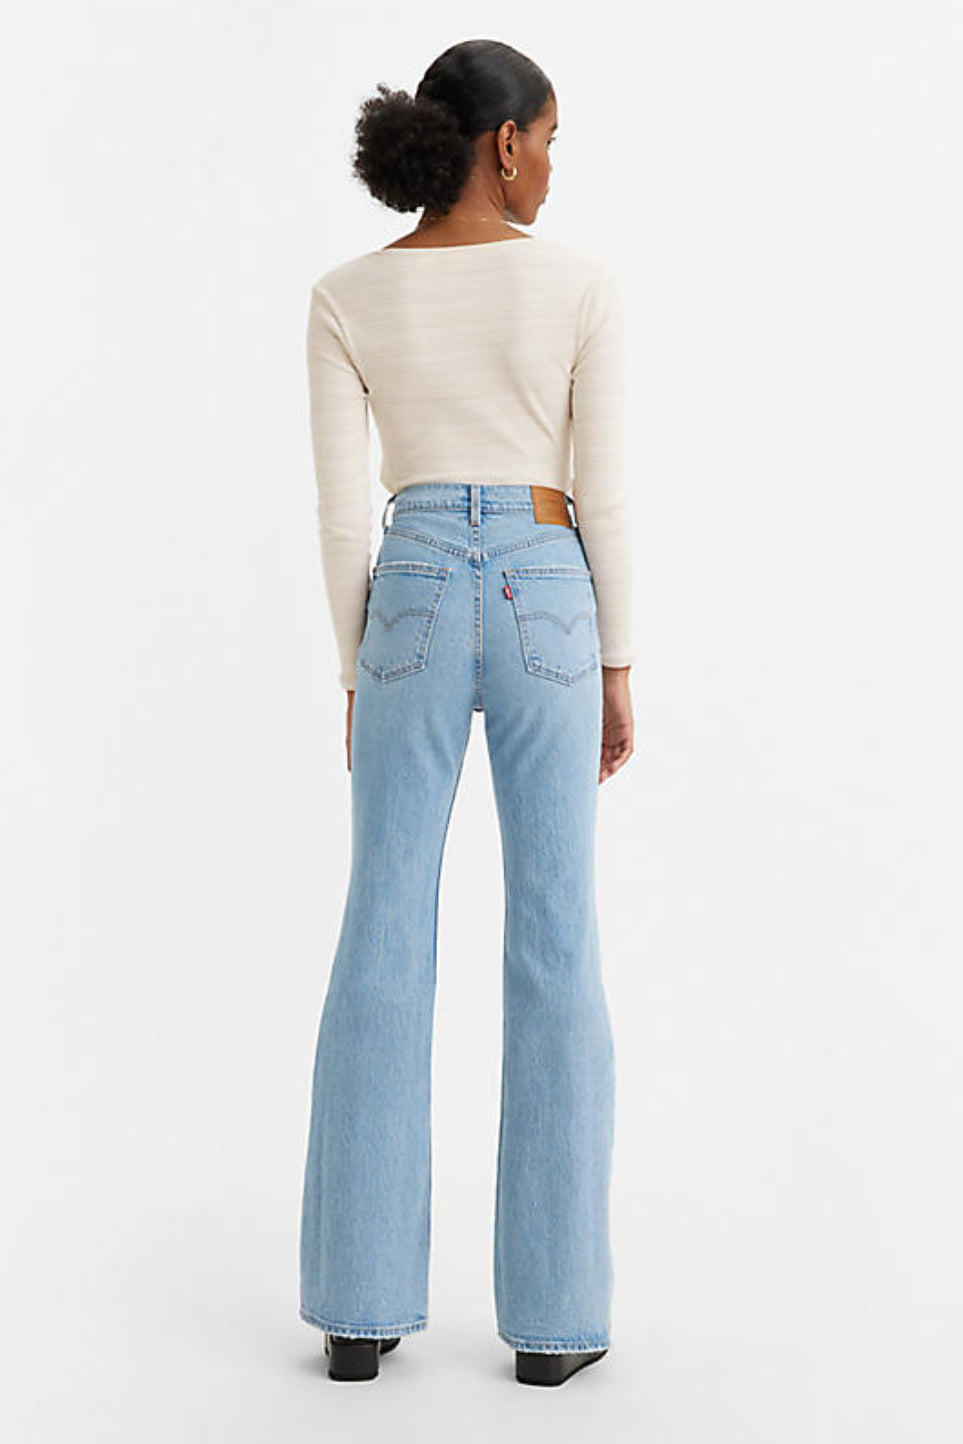 Levi's 70's High Flare Women's Jeans